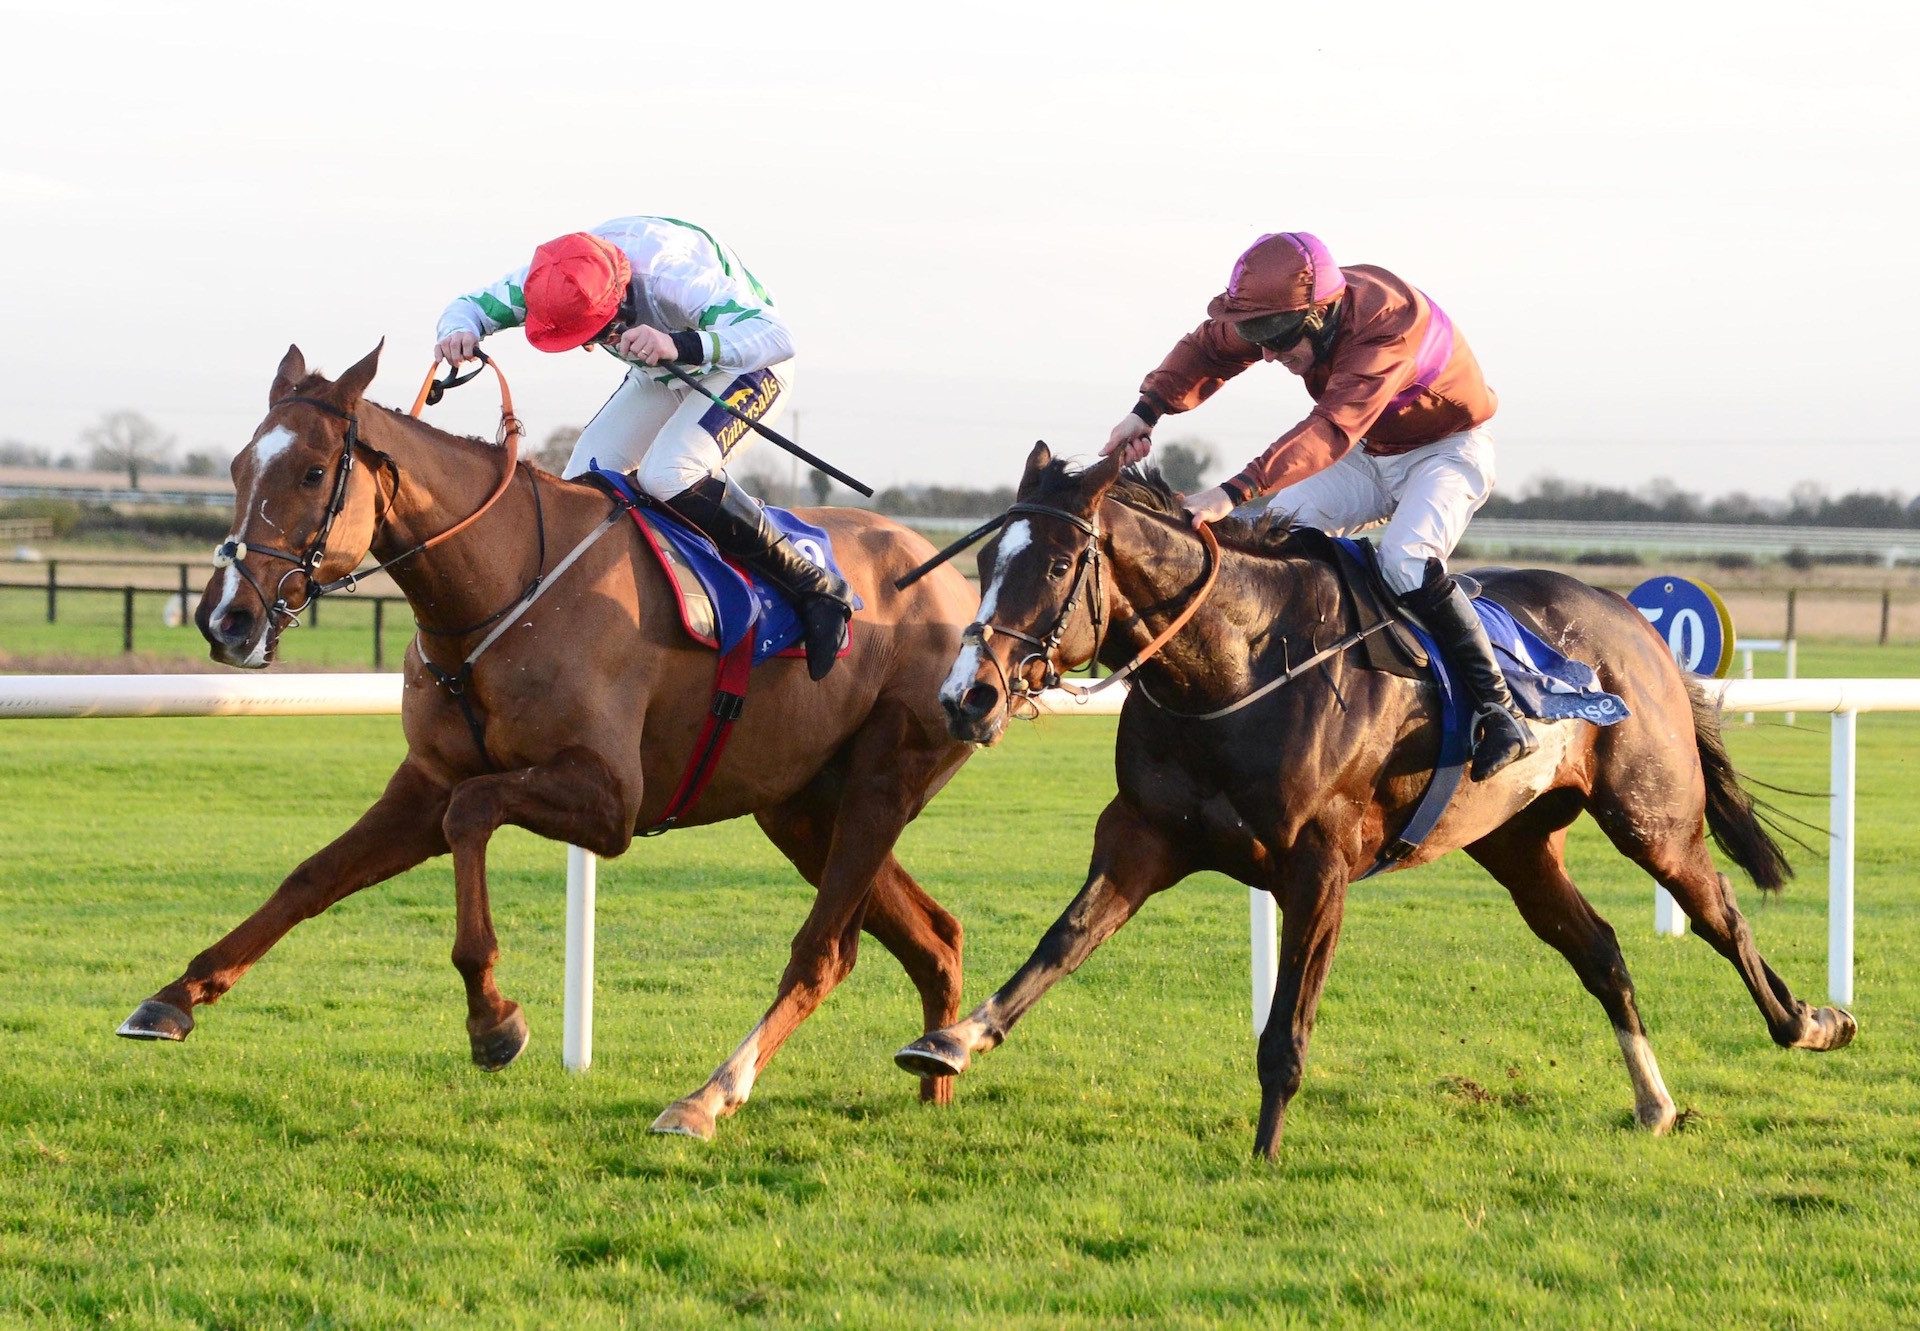 Glenglass (Ocovango) Wins The Point To Point Bumper At Fairyhouse